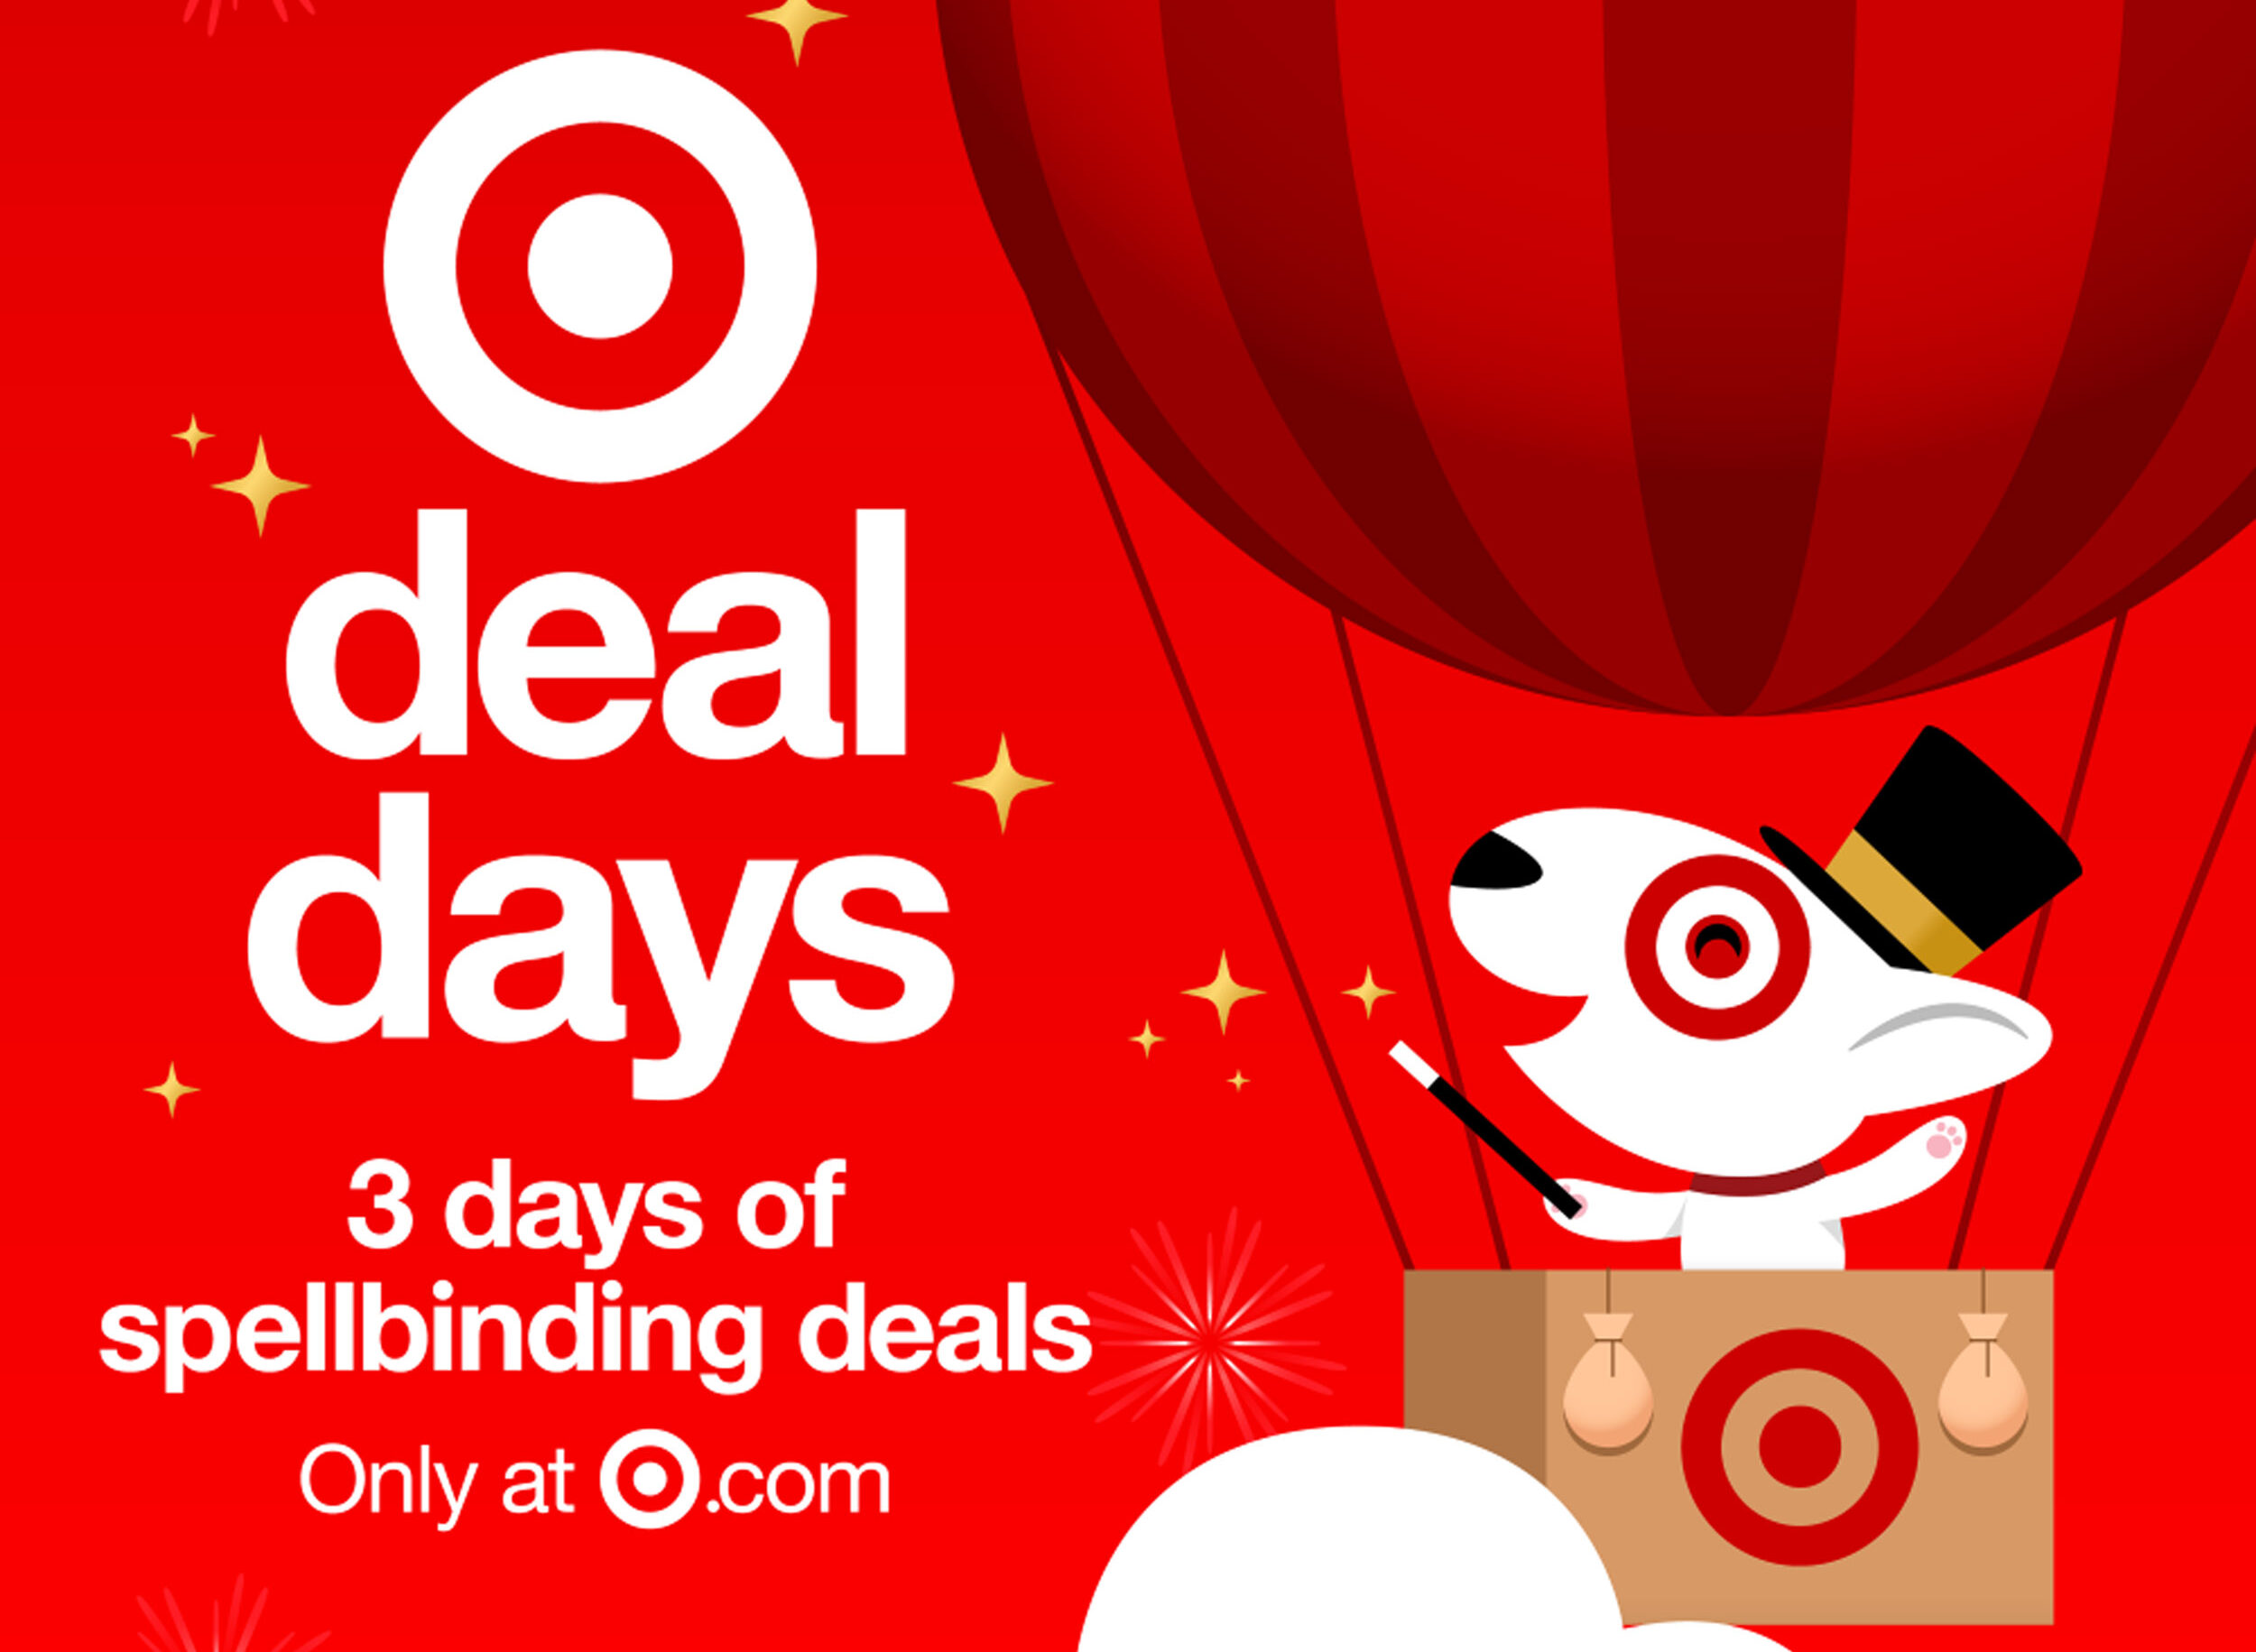 Target Deal Days Are Back & Better Than Ever